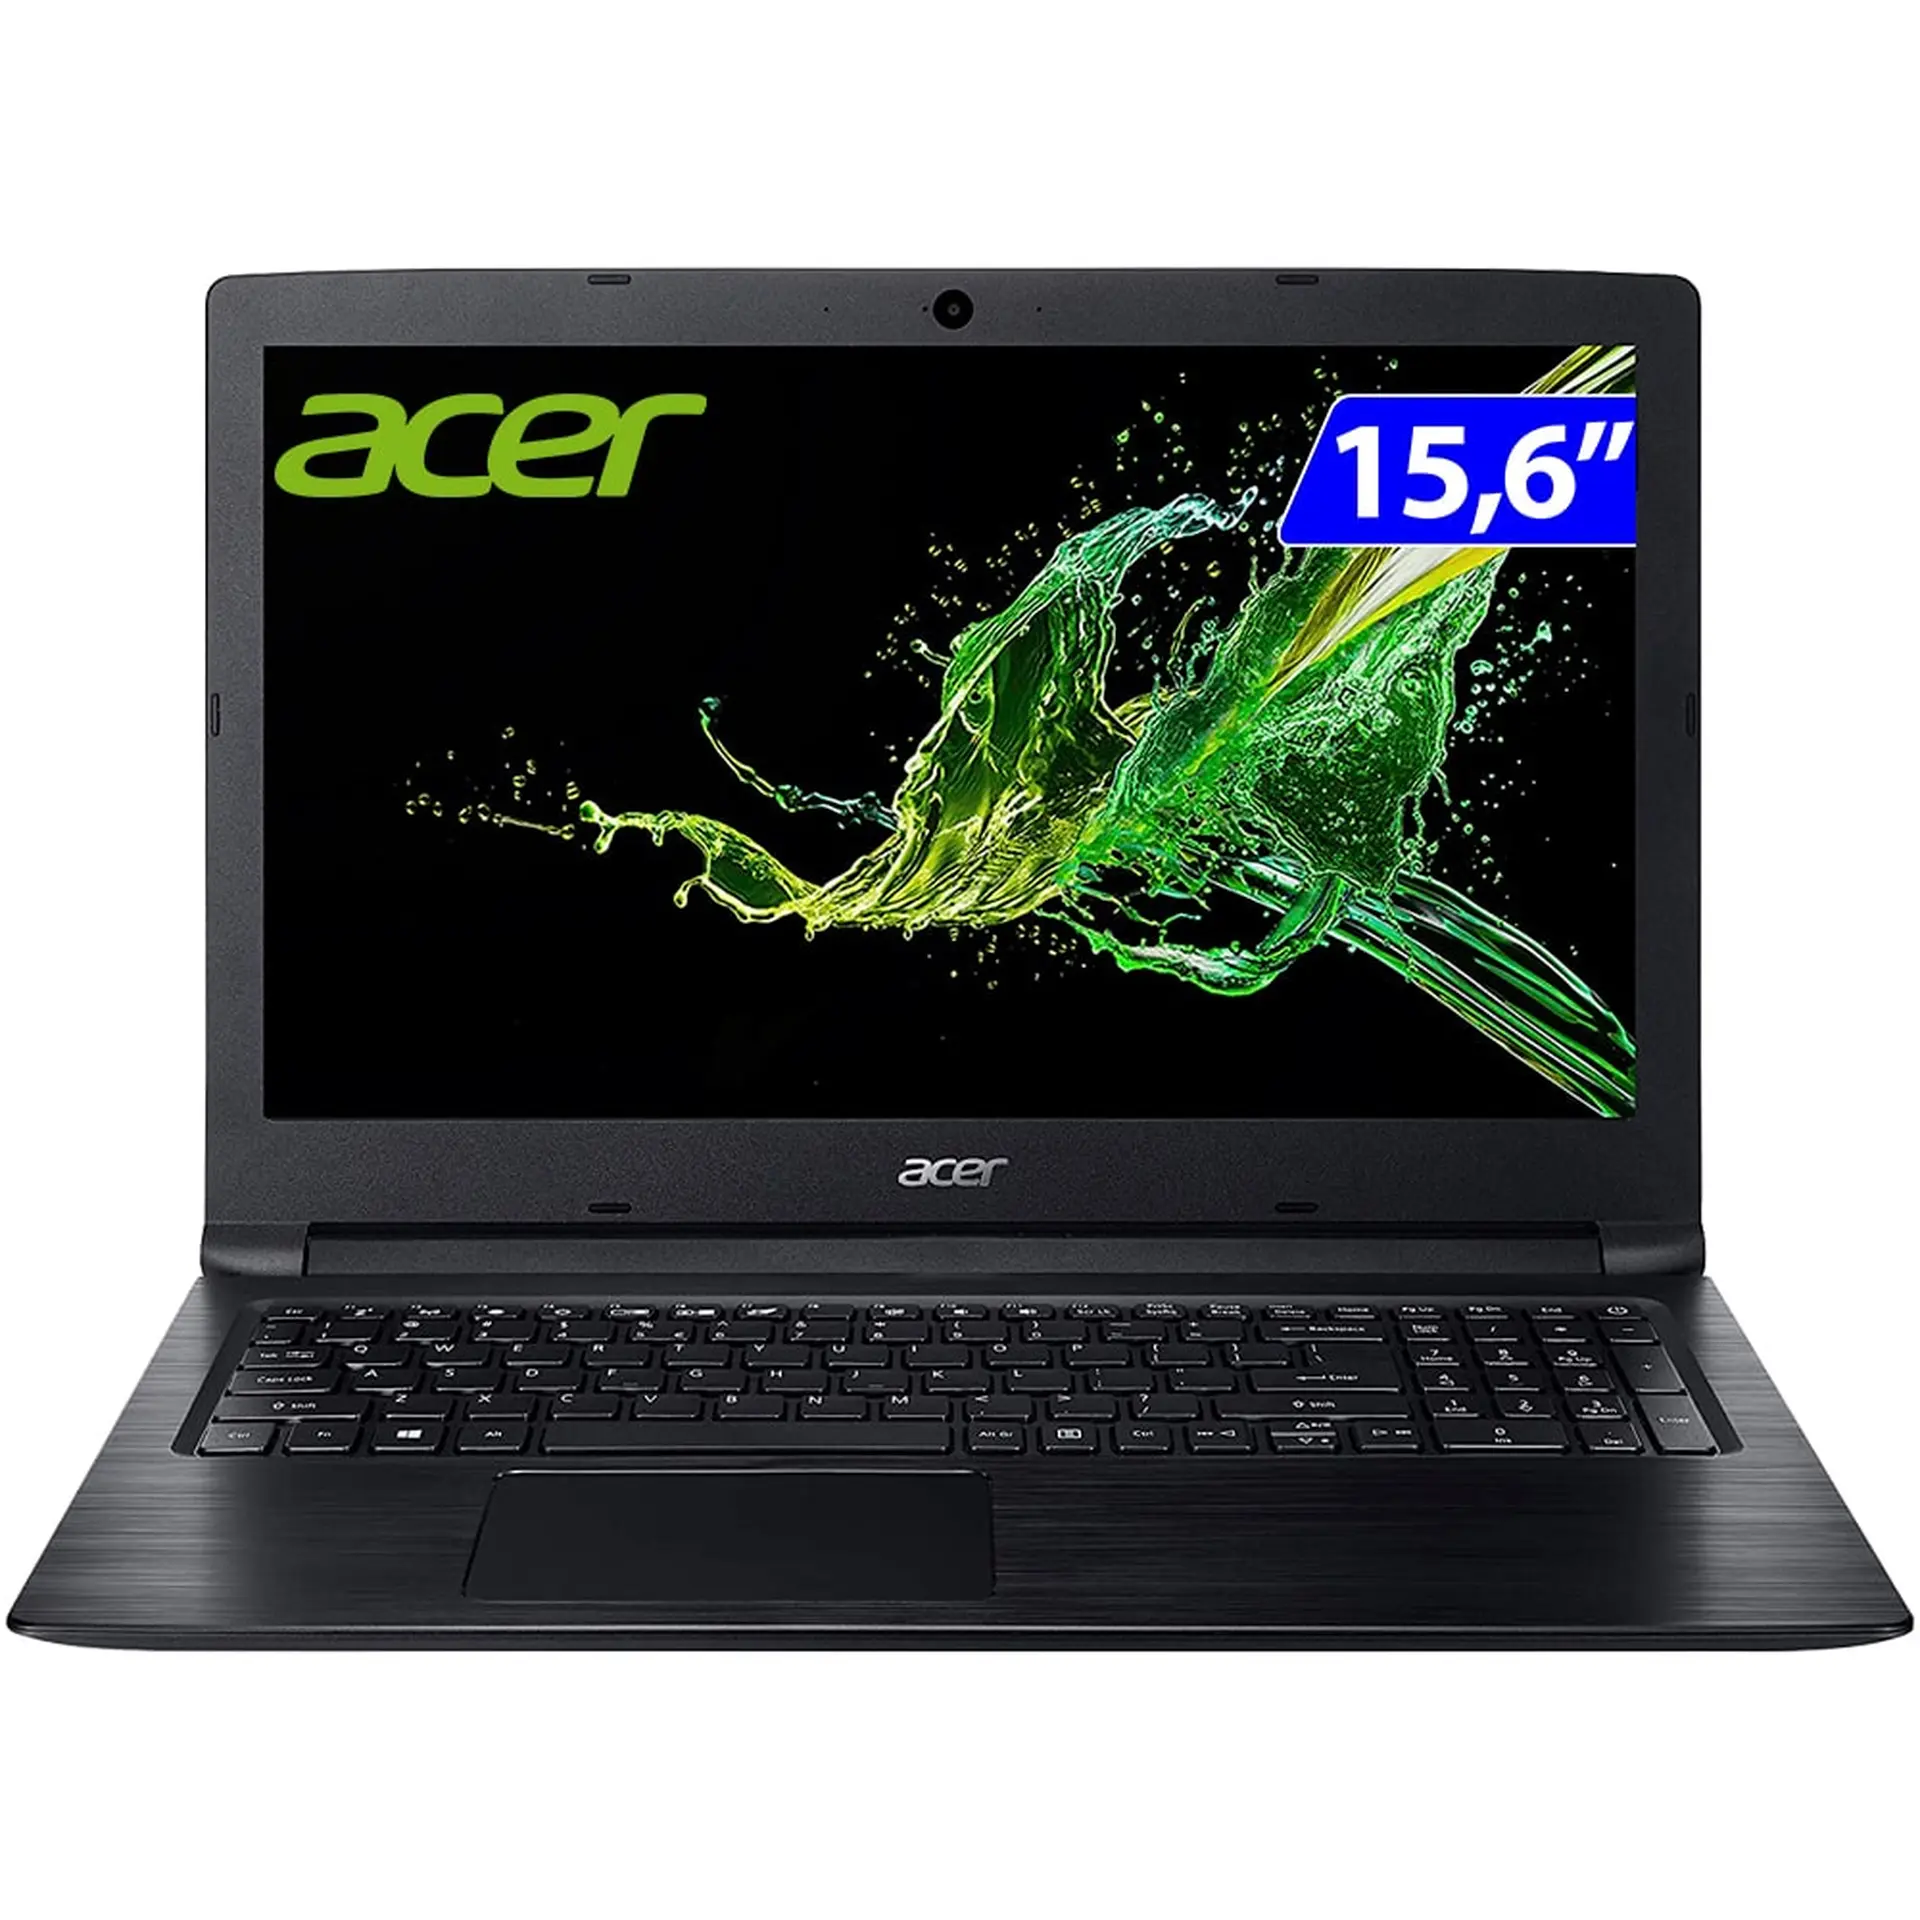 Notebook Acer Aspire 3 i5 Endless OS 4GB 1TB HDD 15.6 A315-53-5100